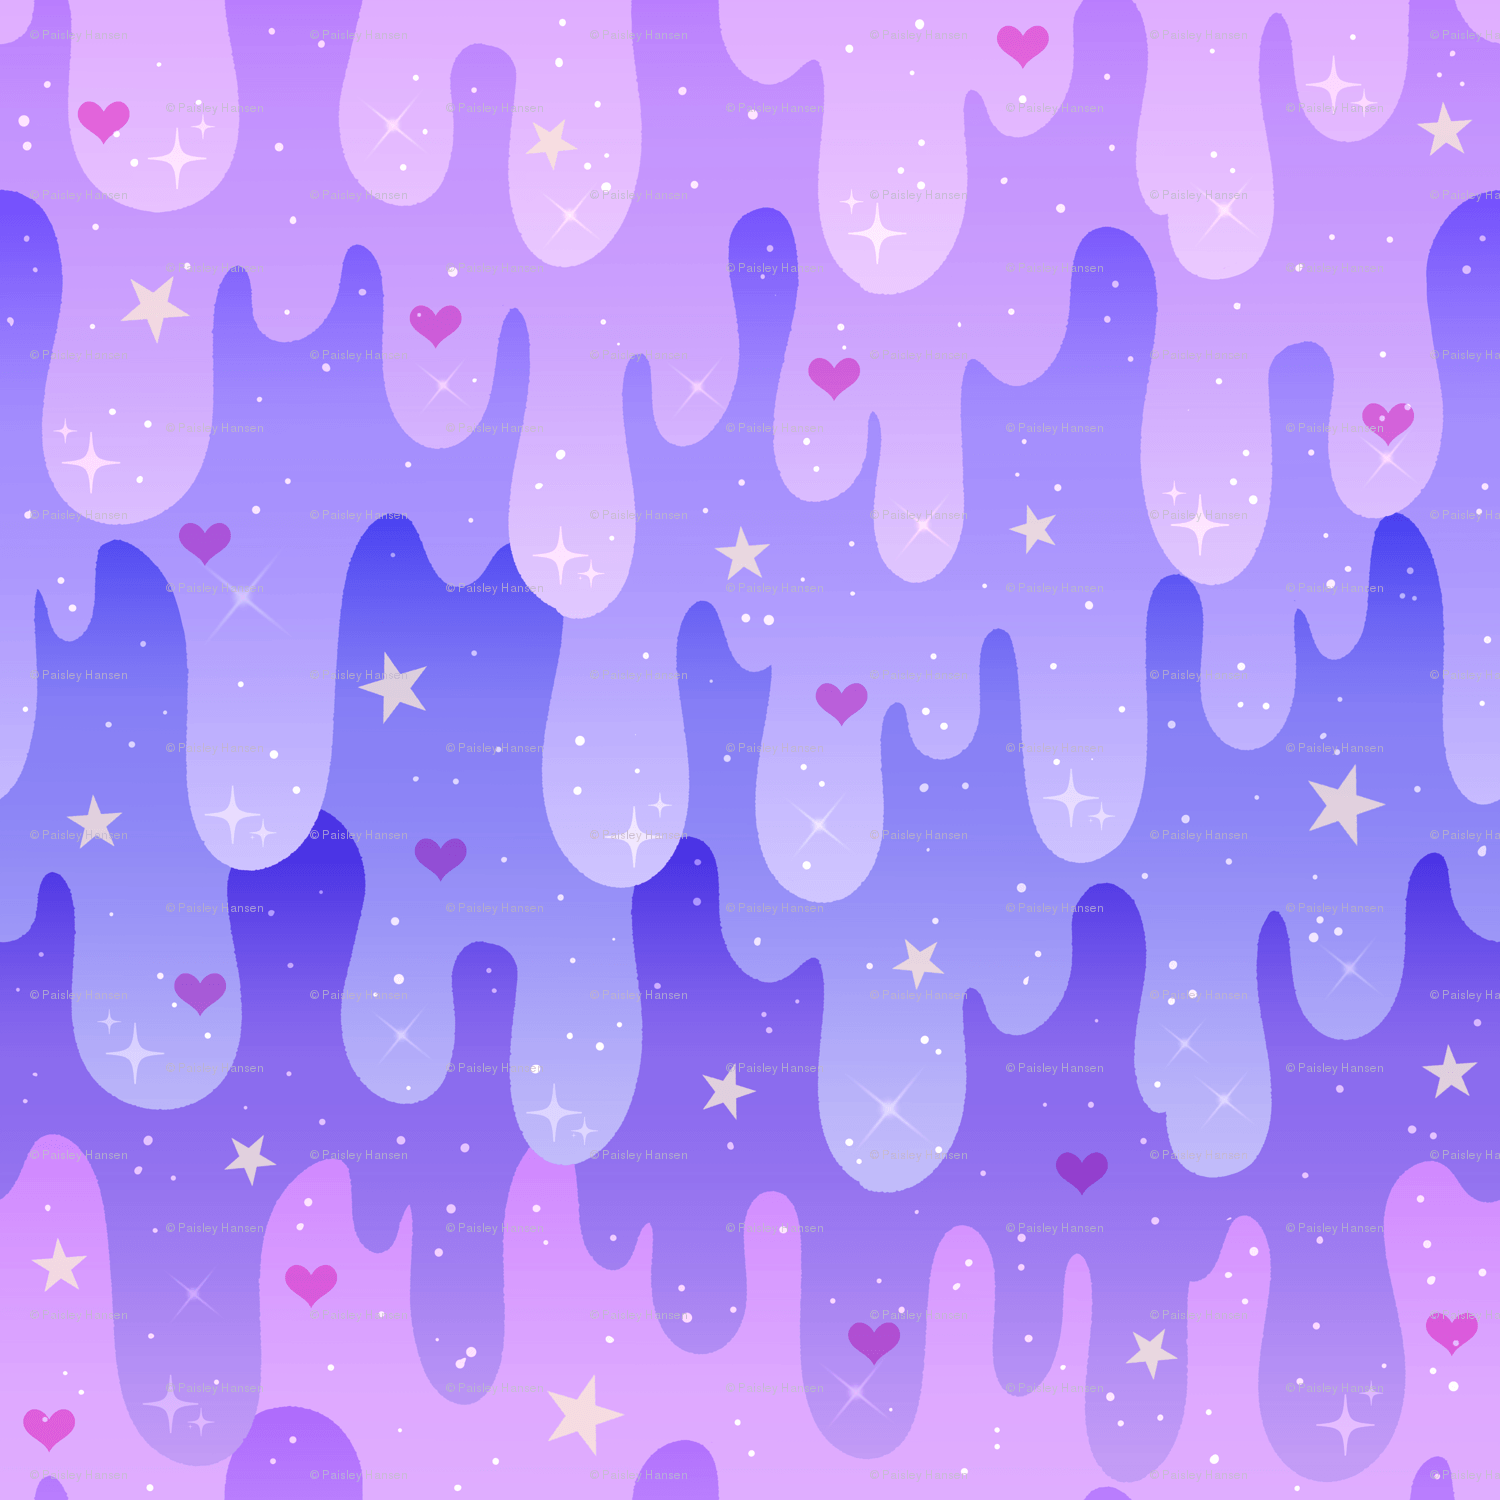 Slime Unicorn Wallpapers - Wallpaper Cave.